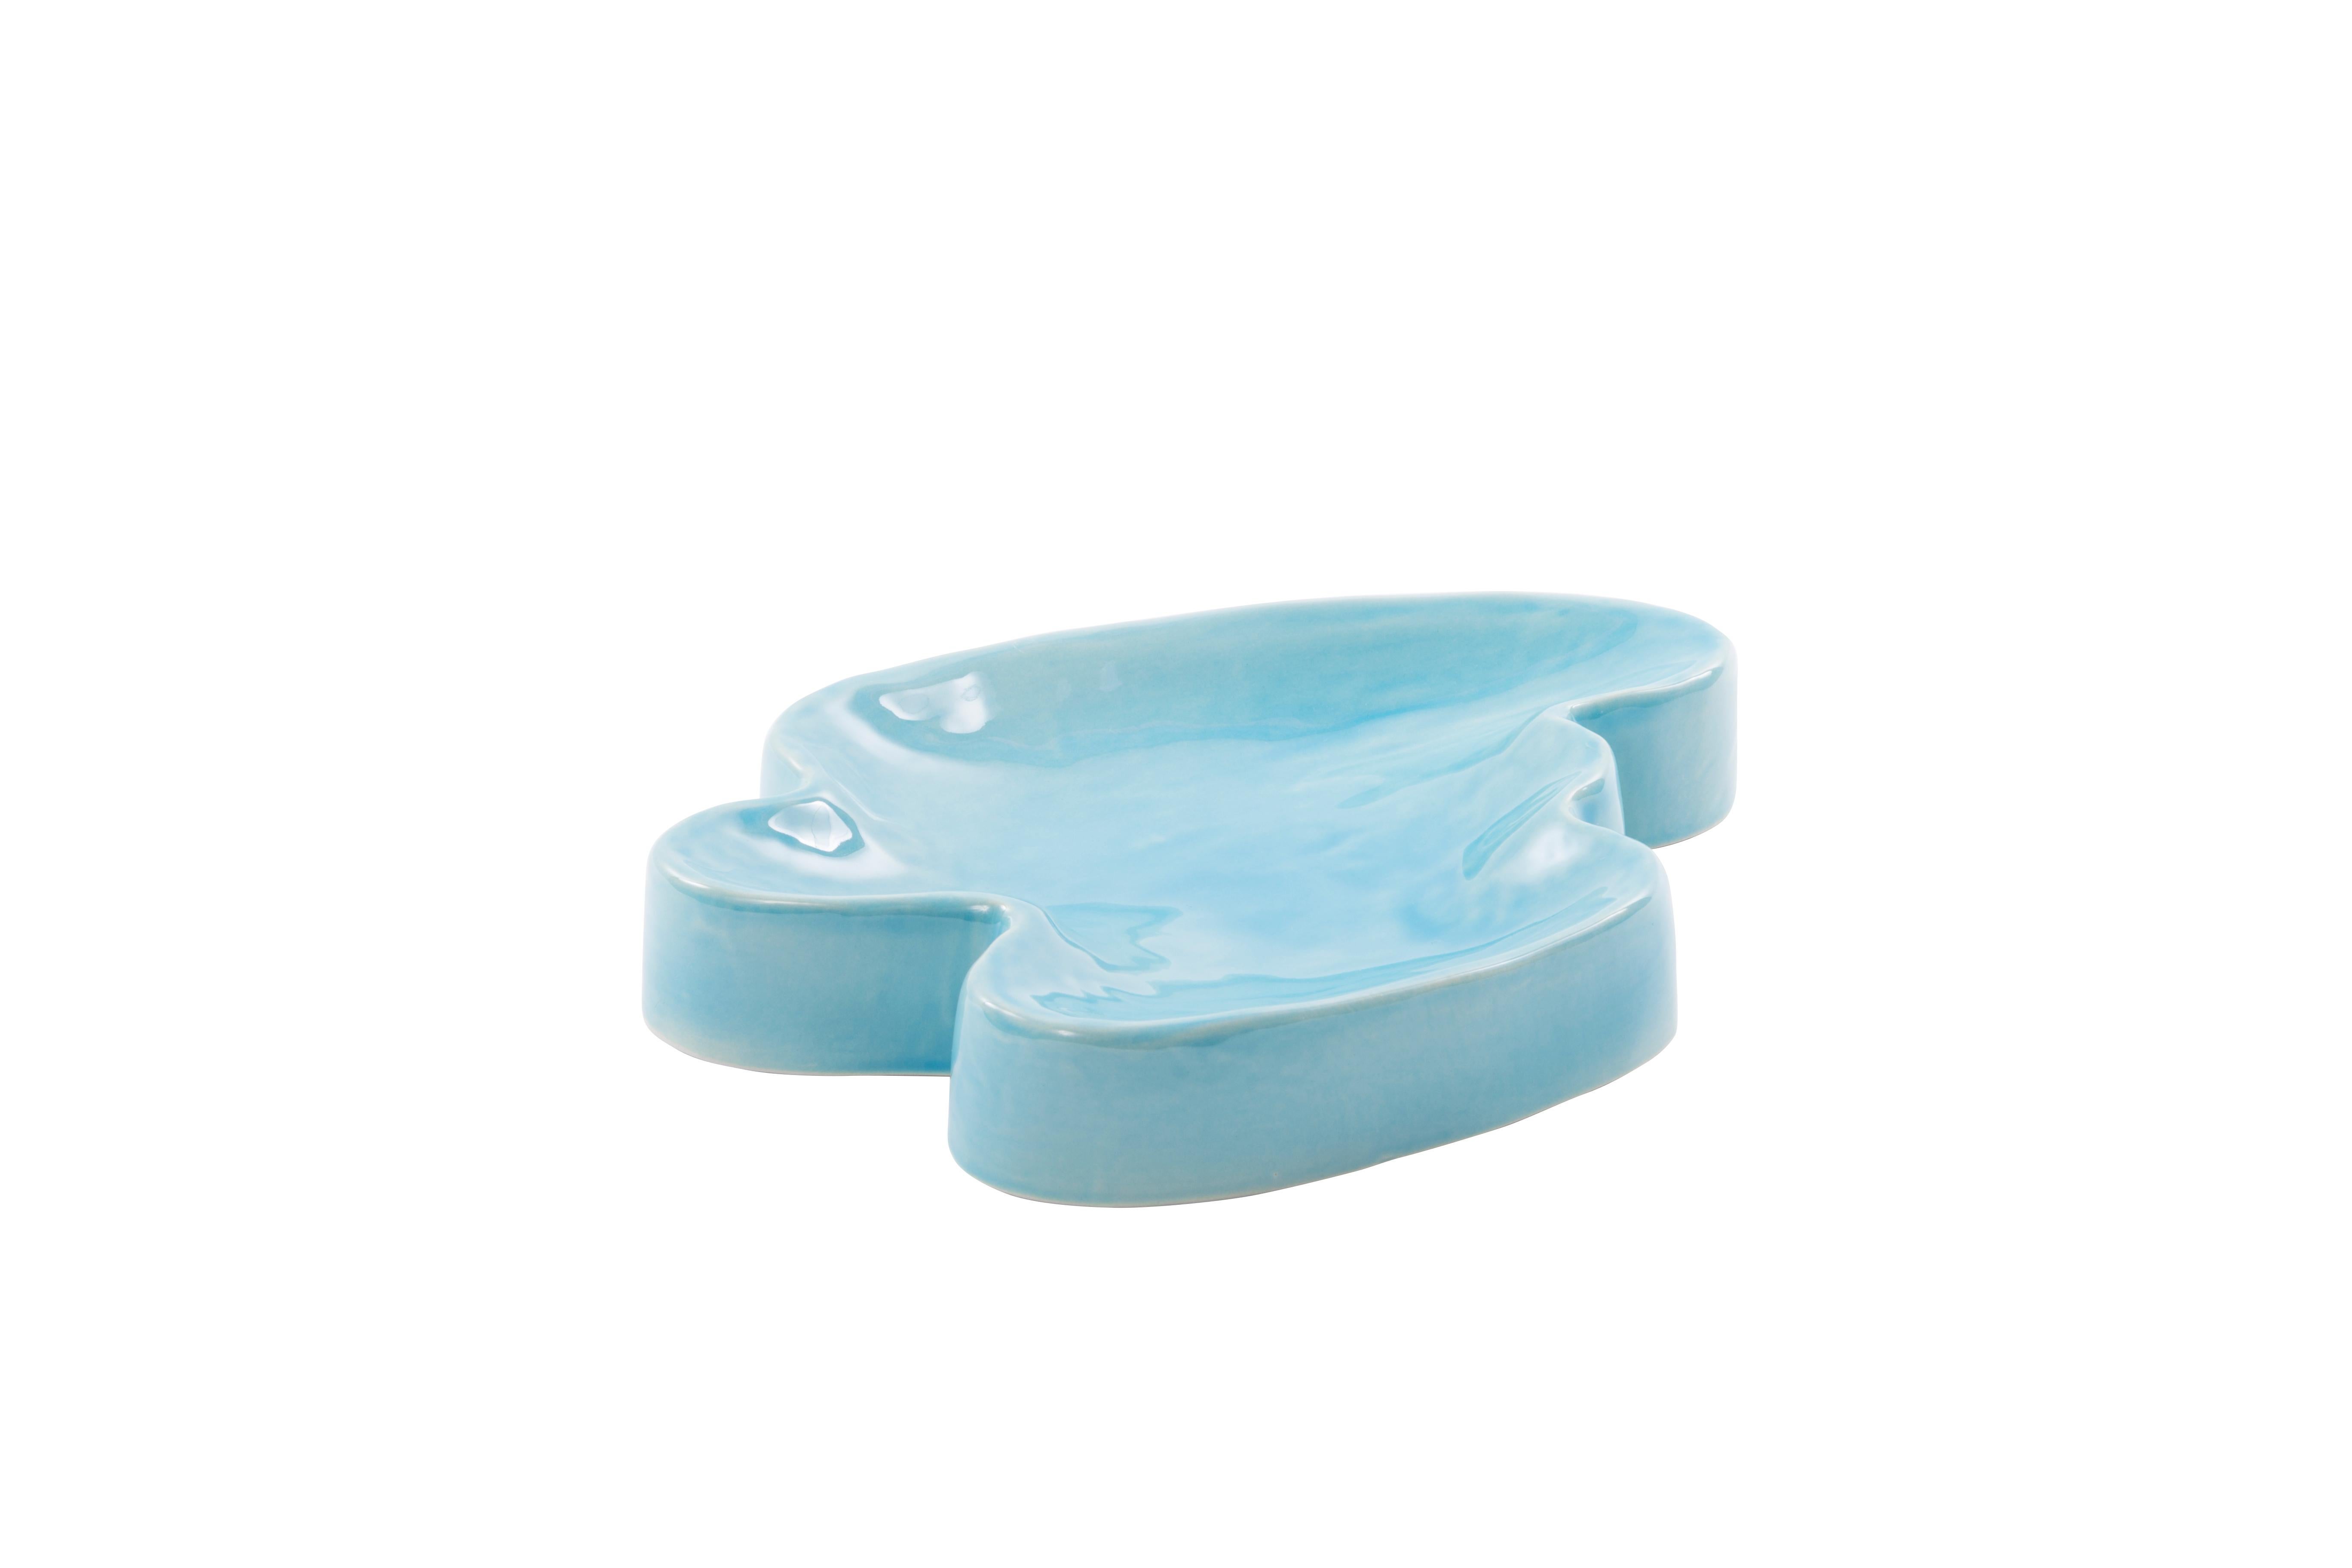 Set of 2 lake small tropical Turquoise tray by Pulpo.
Dimensions: D 27 x W 20 x H 4 cm.
Materials: ceramic.

Also available in different colours.

These charming additions allow you to create a true tablescape environment; from the tones and